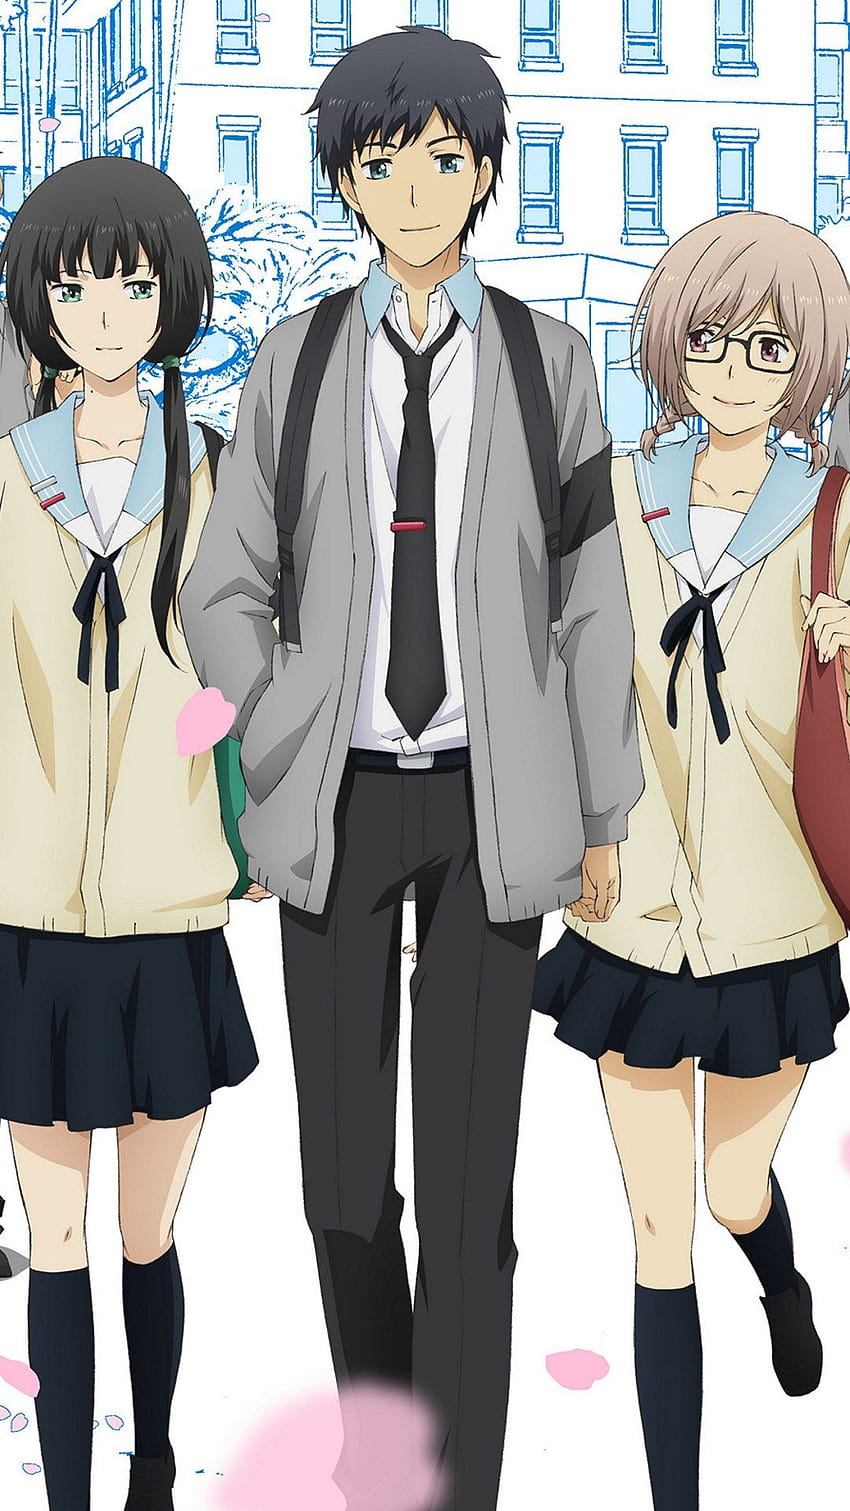 Most Amazing Anime Like ReLIFE & Where to Watch Them